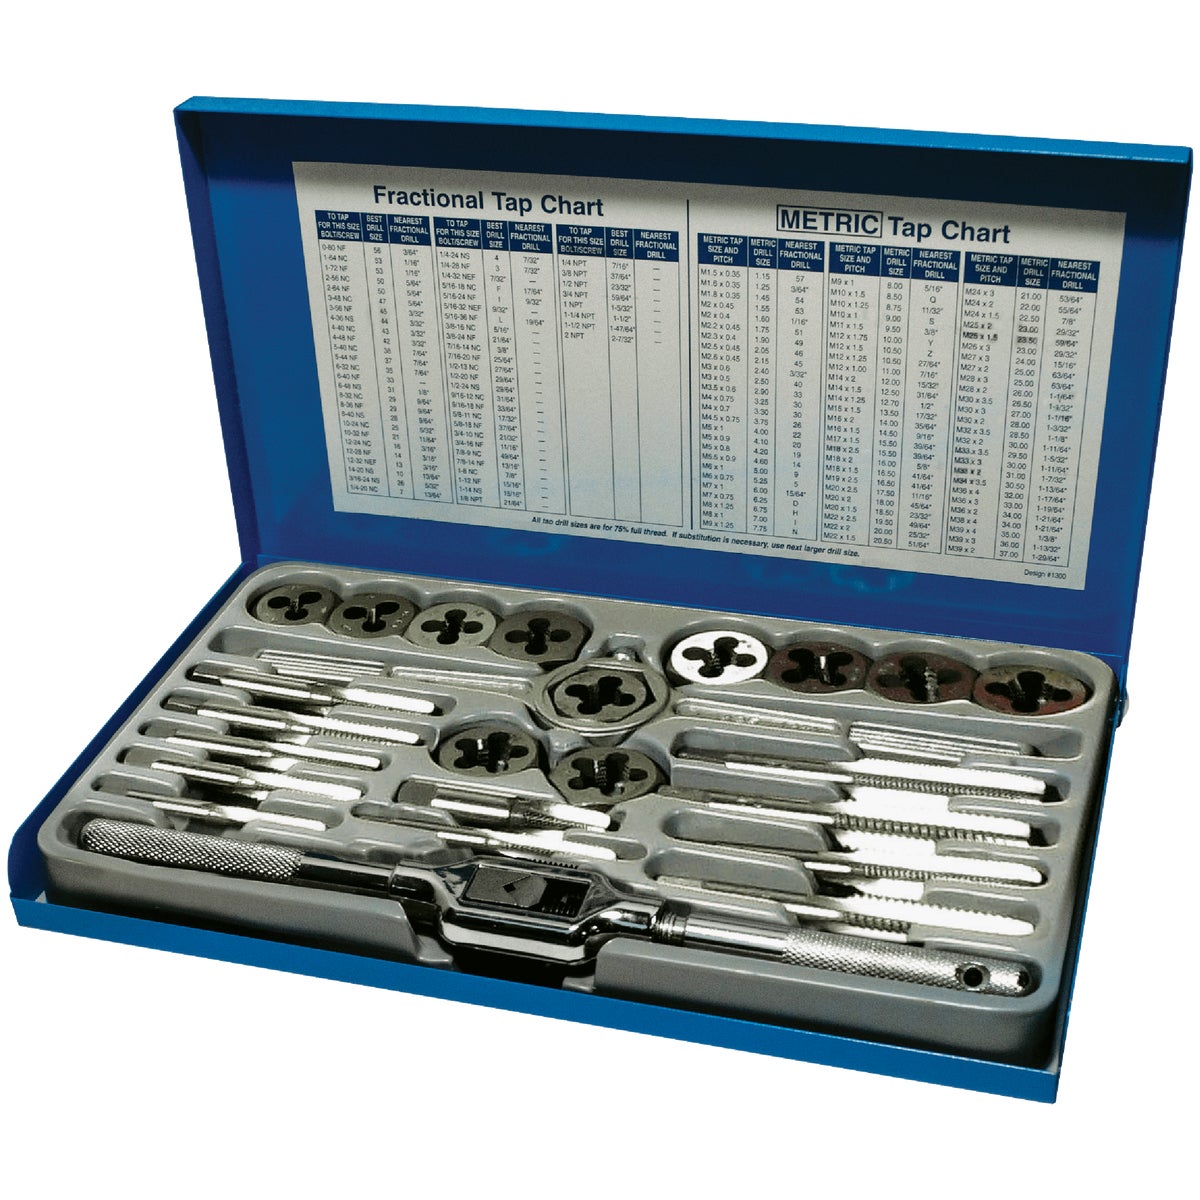 Century Drill & Tool Tap and Die Fractional Set (24-Piece)